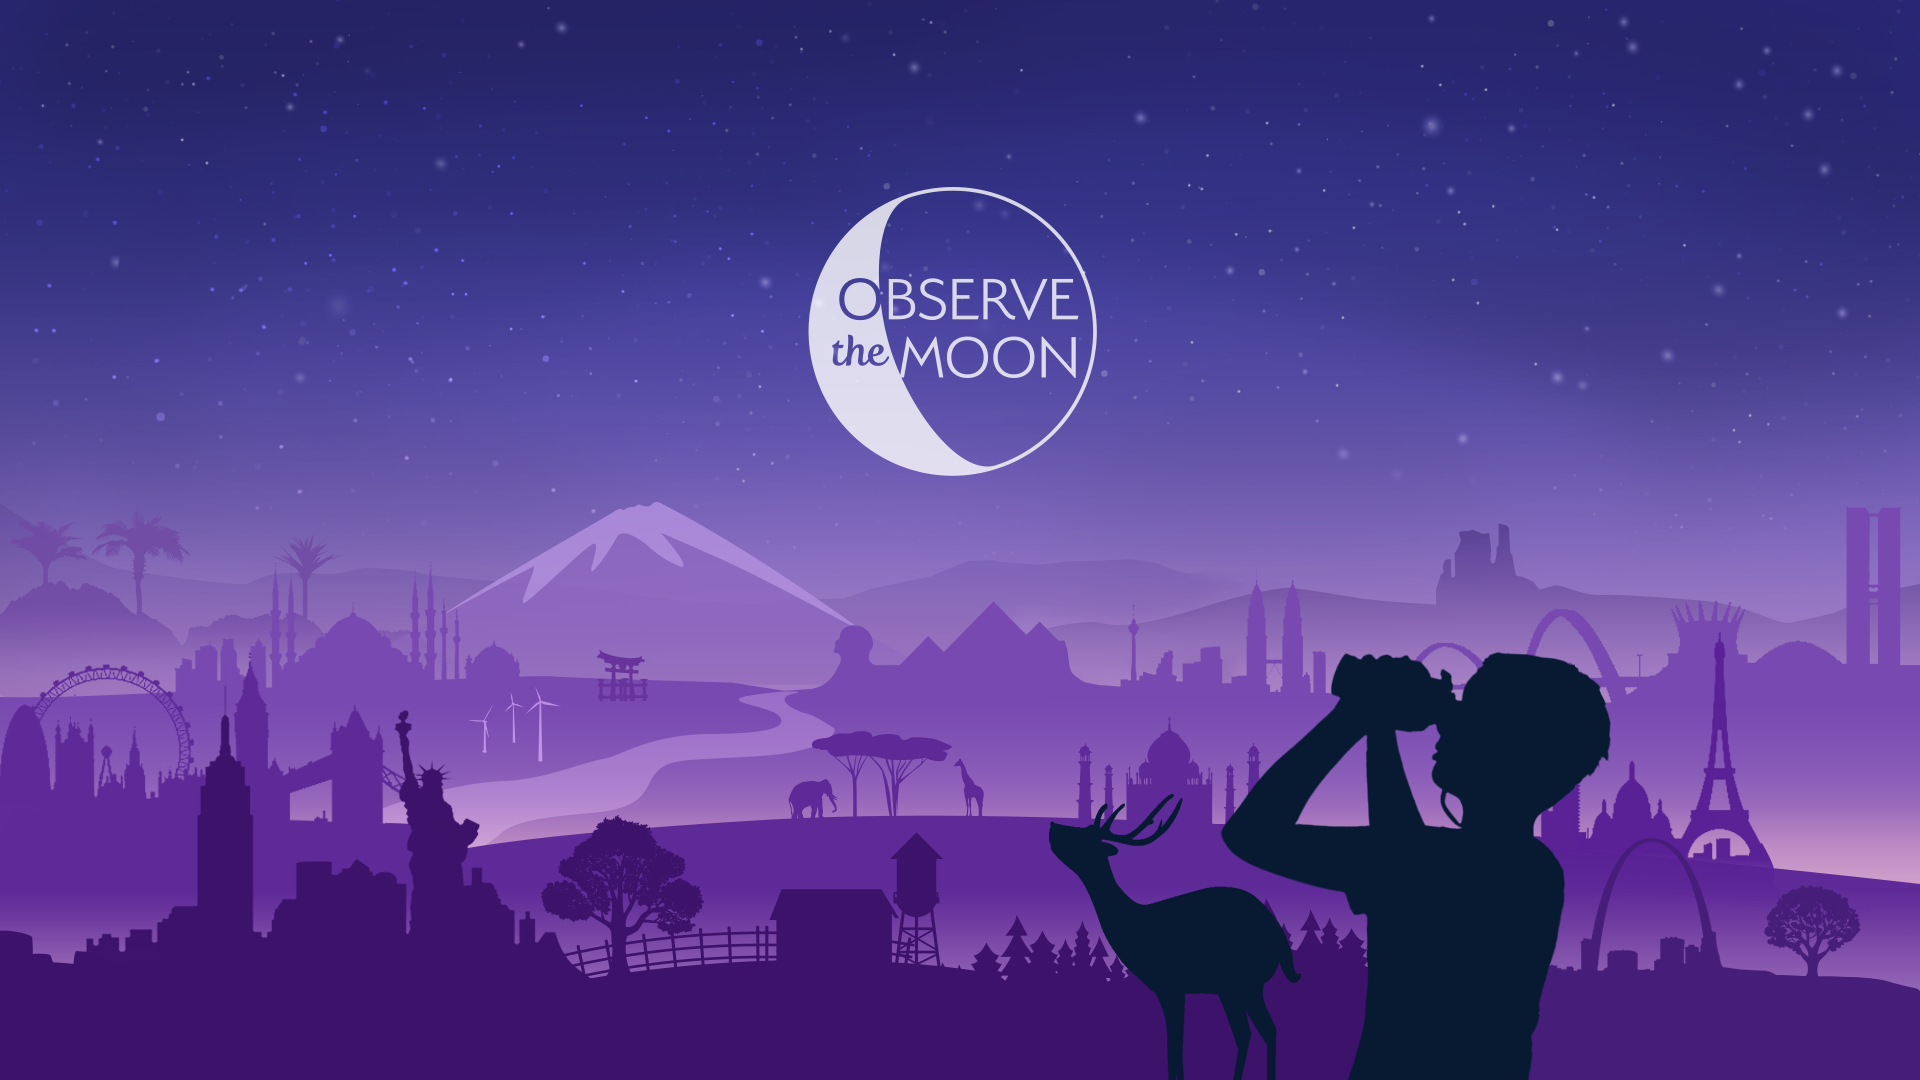 Quick link to associated B-ROLL for interviews.Quick link to canned interview with Andrea Jones NASA Public Engagement / Director, International Observe the Moon NightClick here to find out more about this year's International Observe the Moon night 